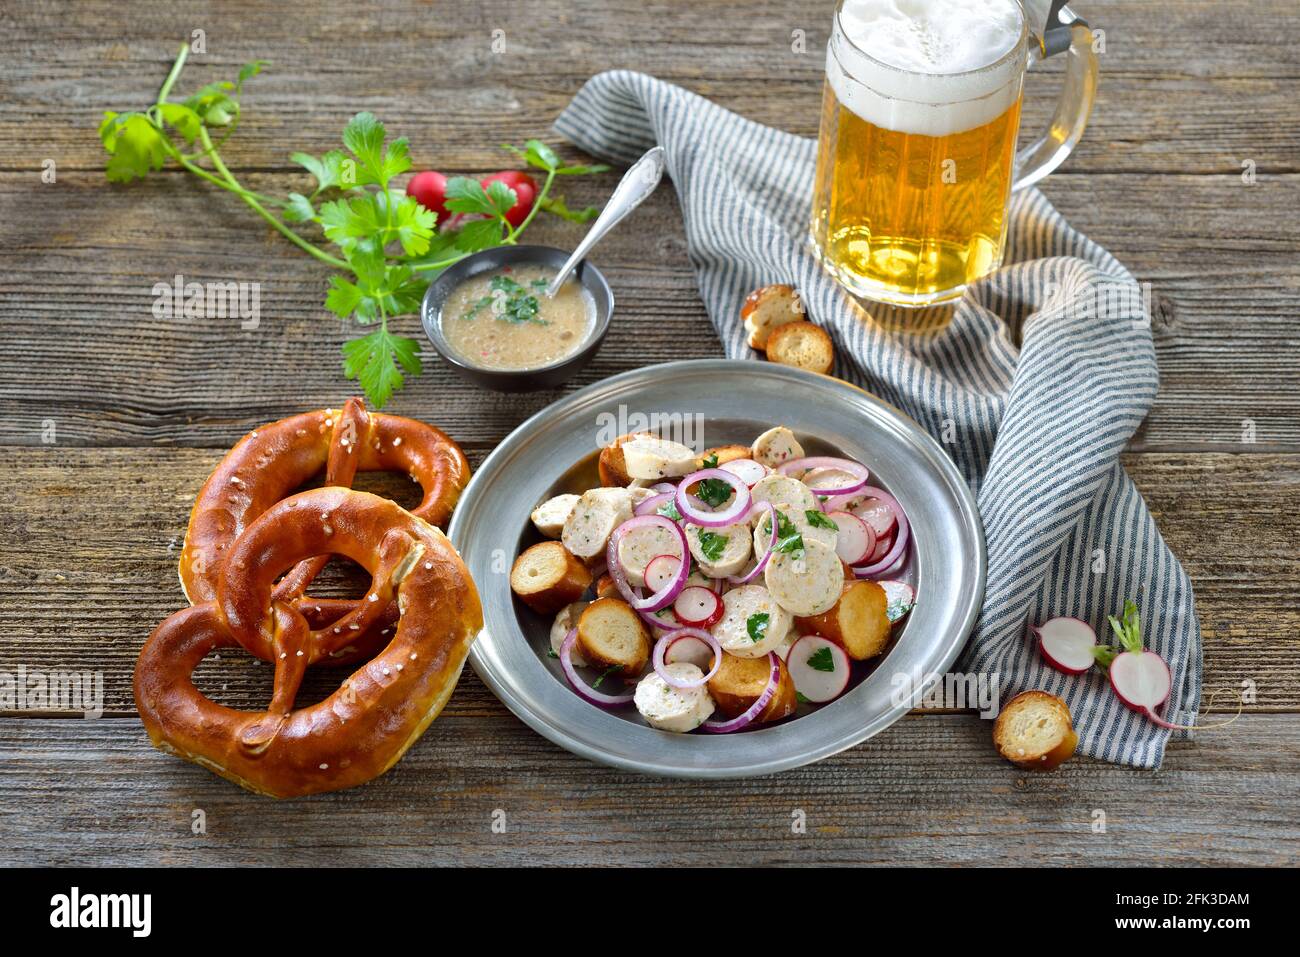 Hearty Bavarian salad with cut veal sausages, roasted pretzel slices on a tin plate, served with a mustard dressing and a mug of lager beer Stock Photo